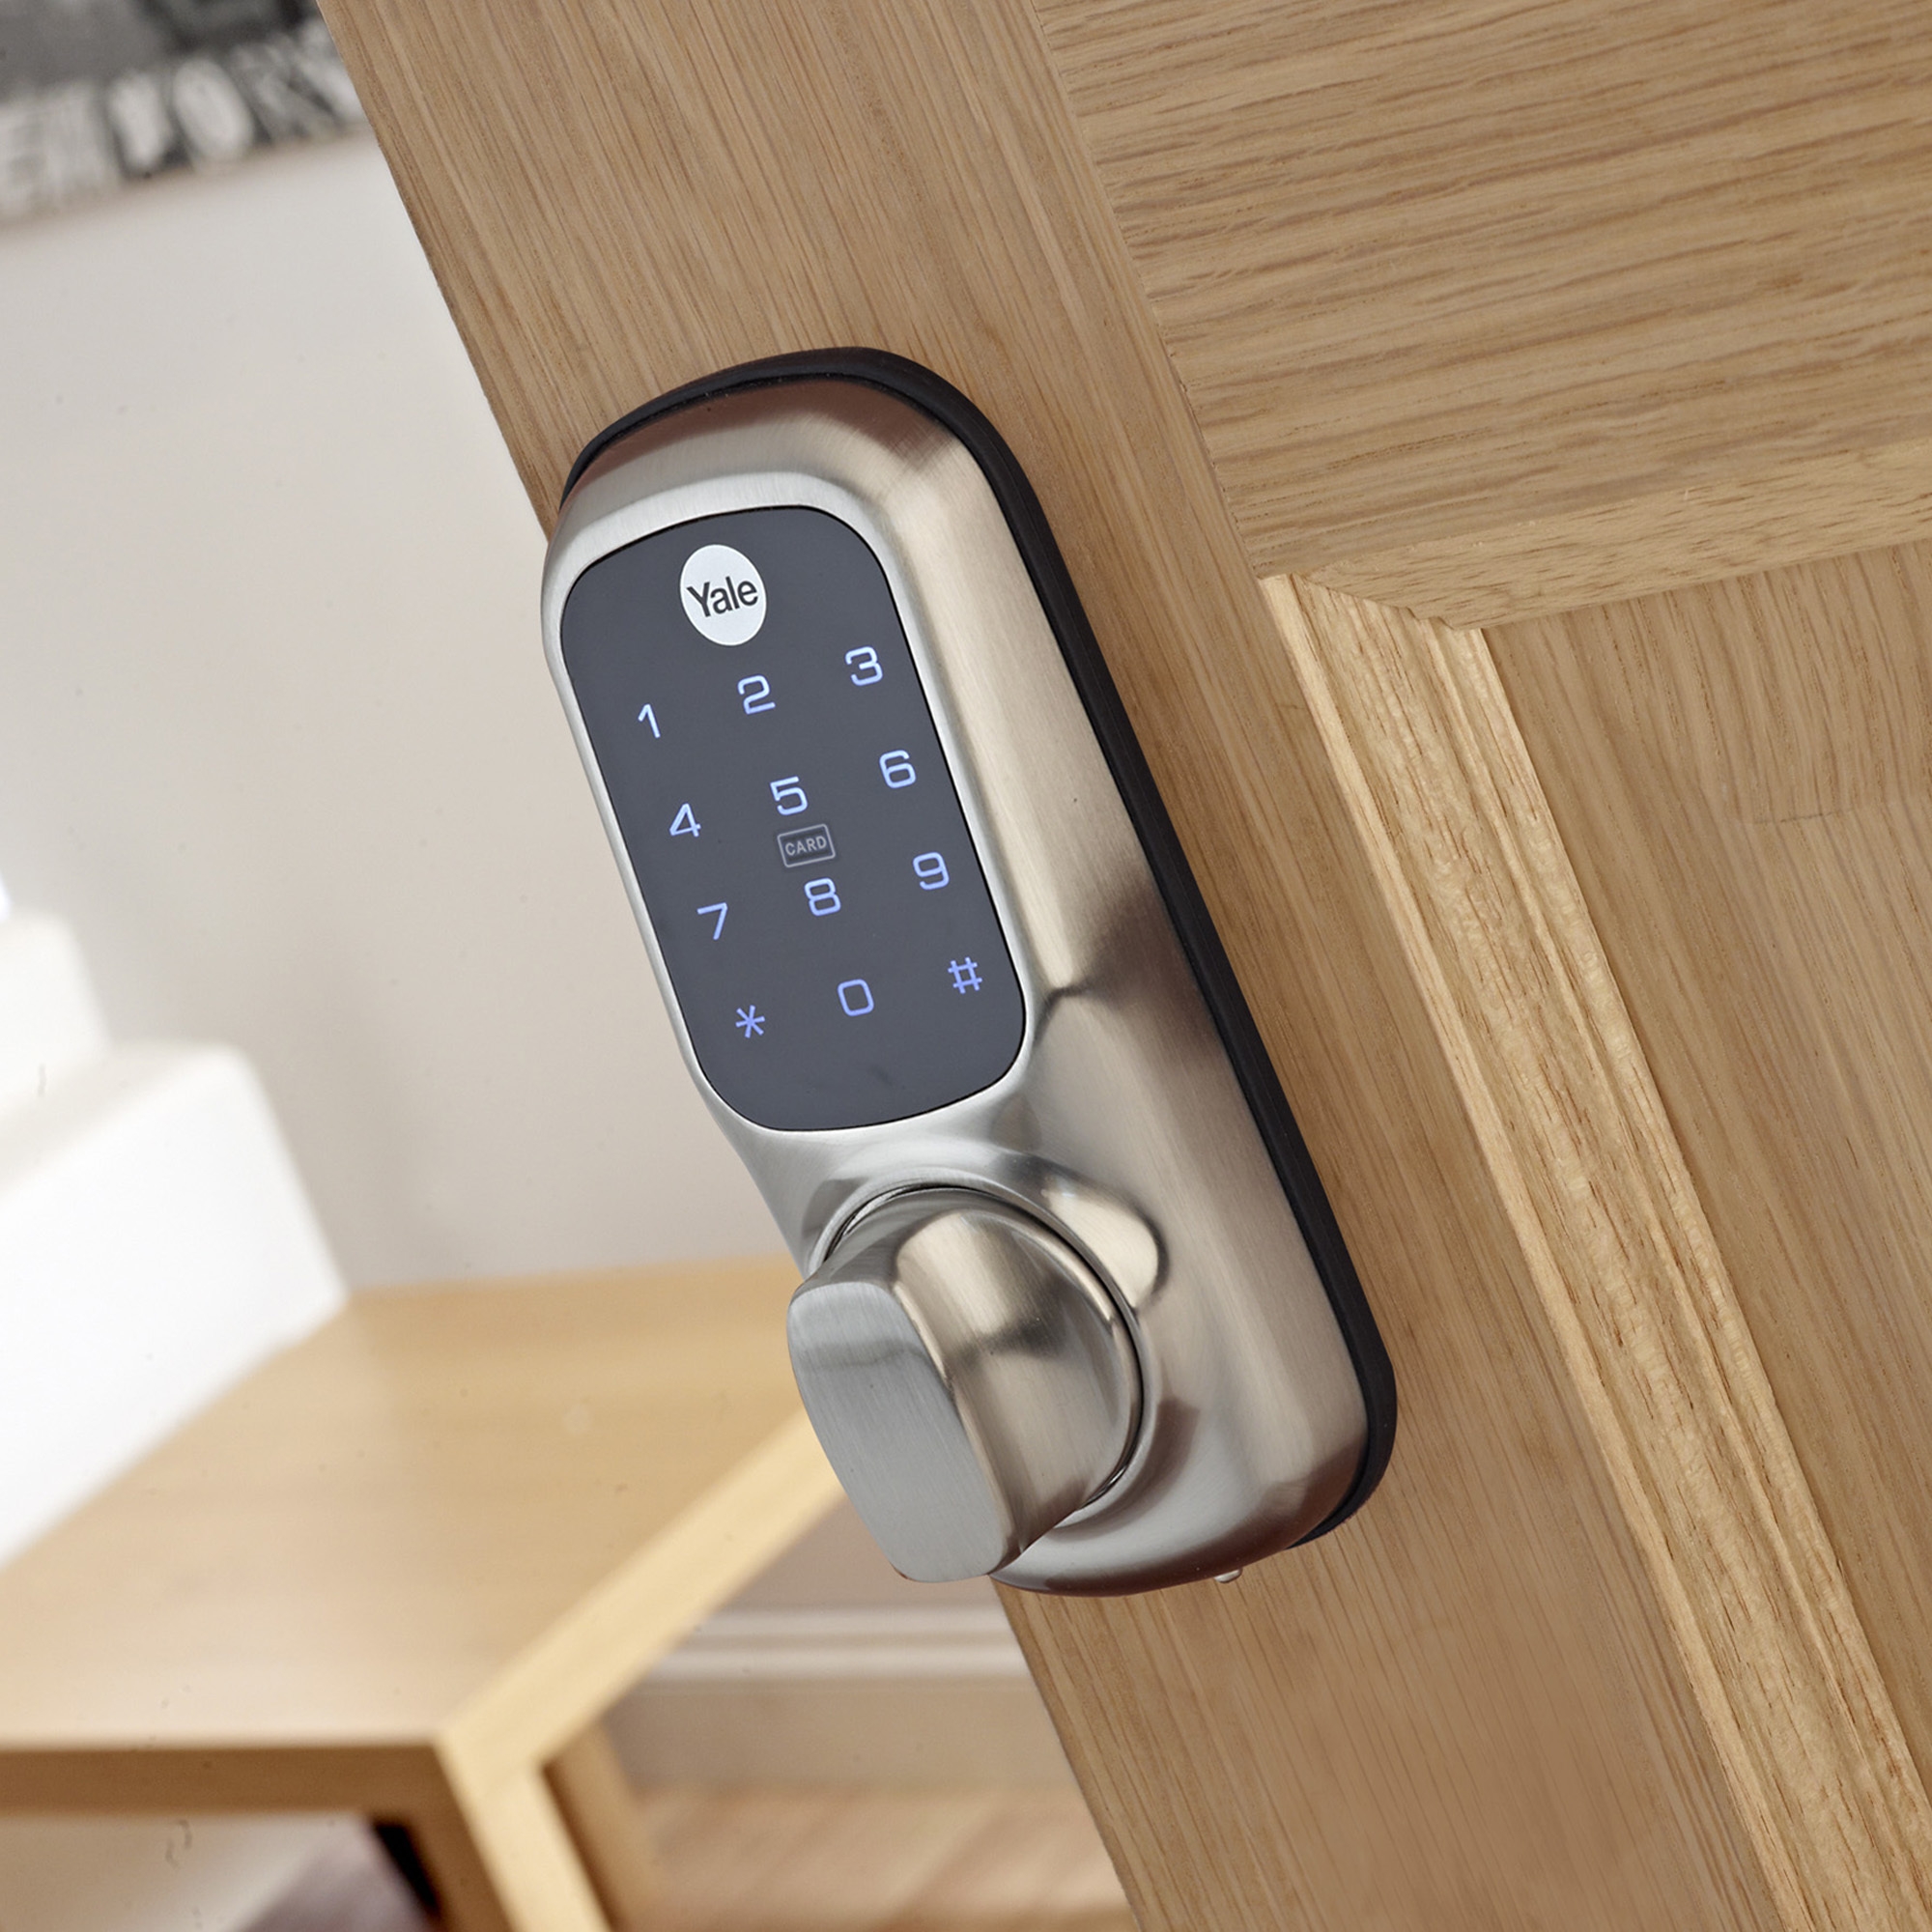 The freedom to secure your home without the need for a key. That can ...